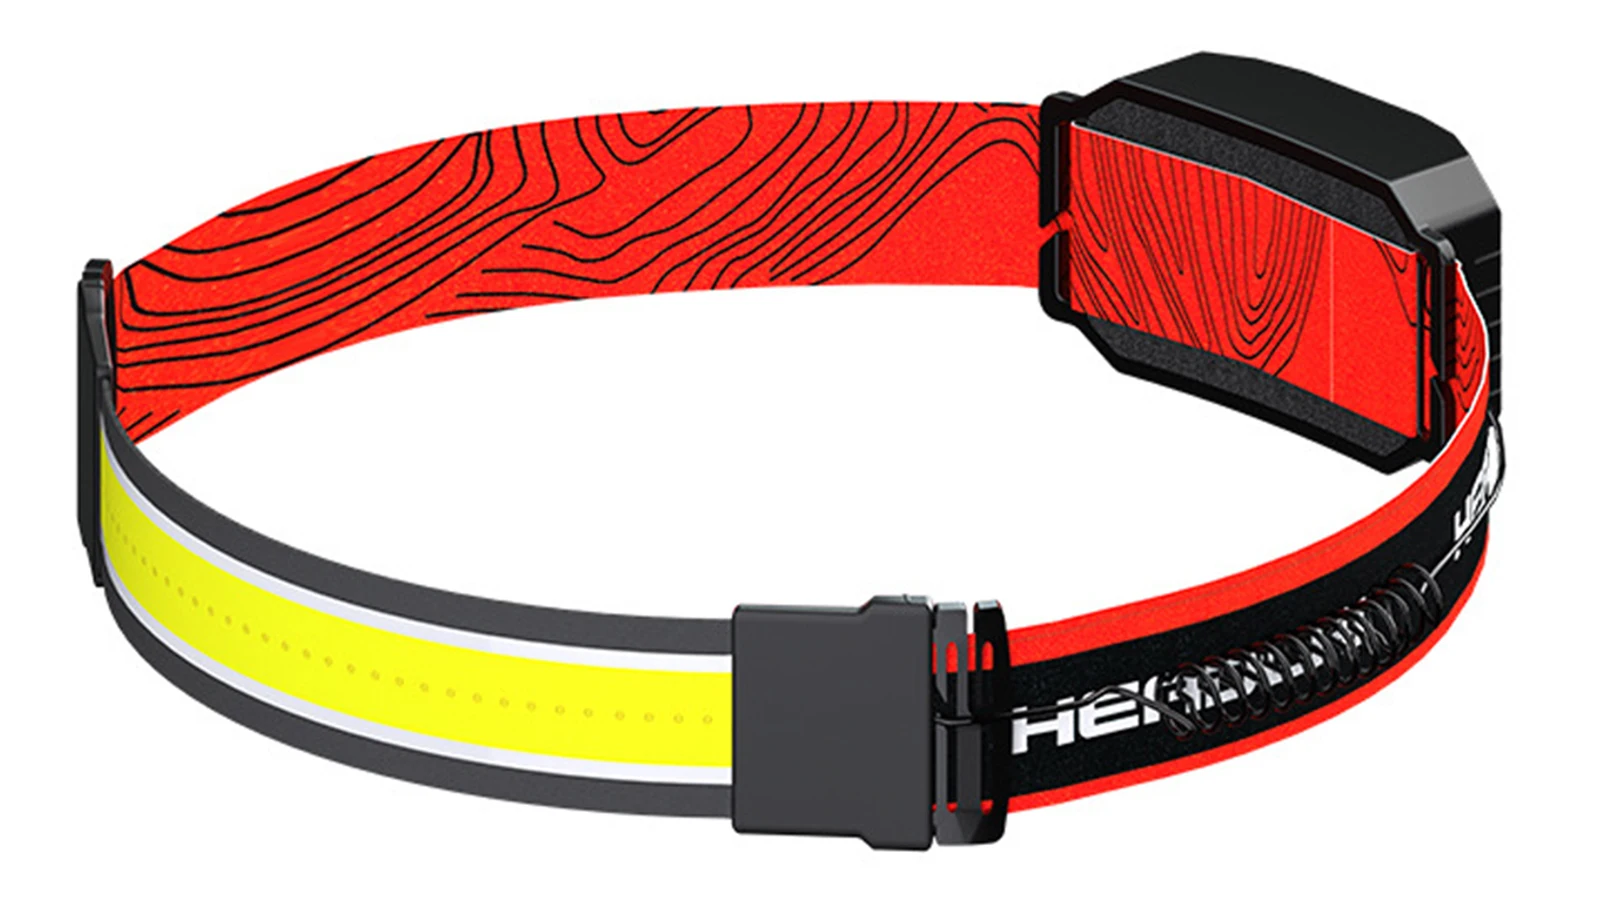 Source LED Headlamp Rechargeable Head Lamp with Red Taillight Lightweight  Waterproof Headlamps for Camping Hard Hat, Running Lights on